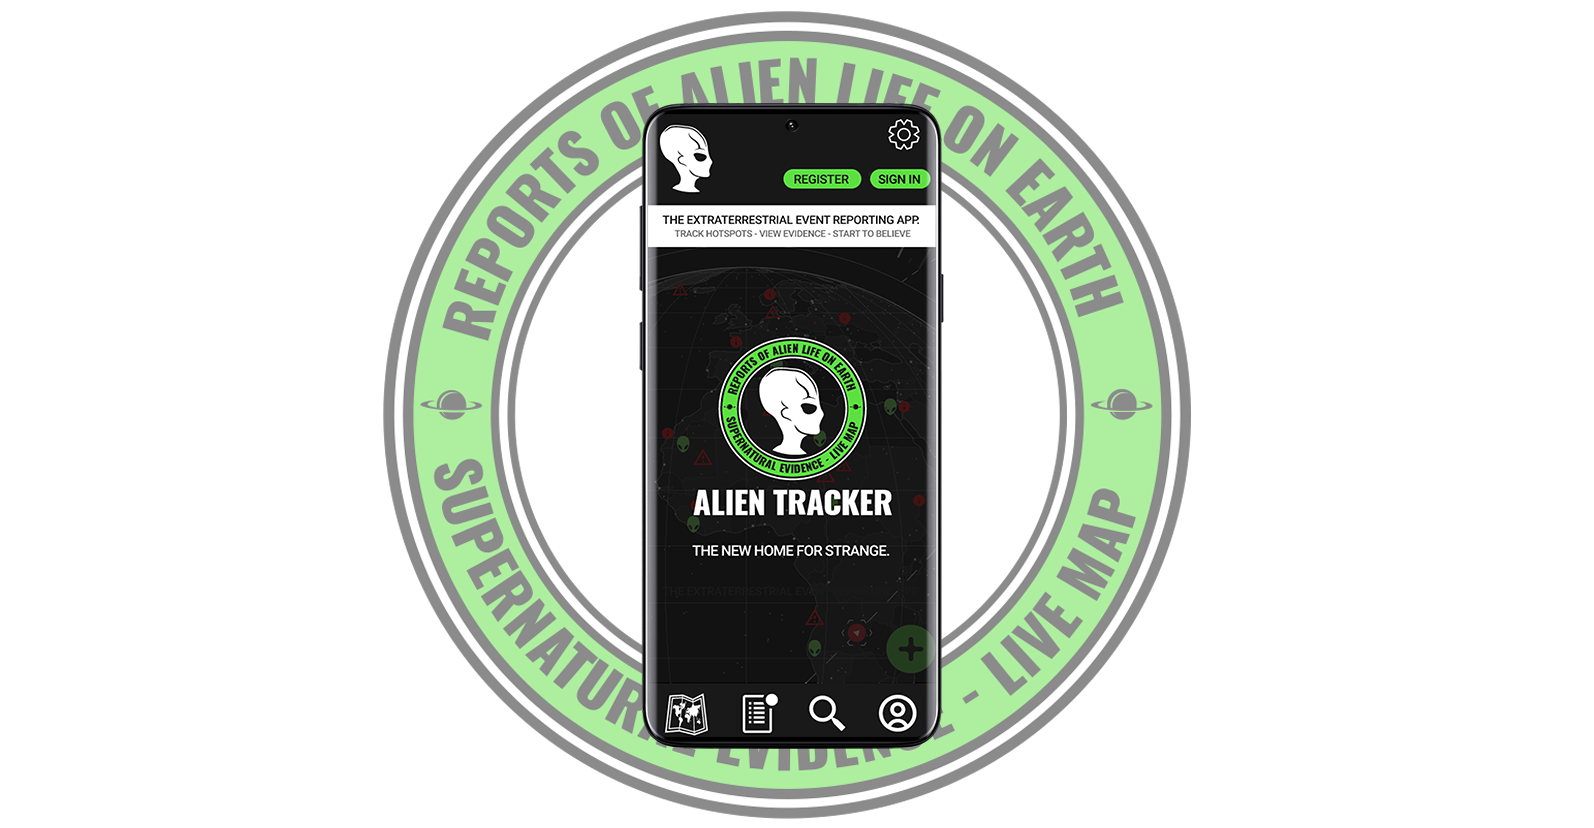 Breaking News - AlienTracker App is going to be the newest form of social media entertainment.